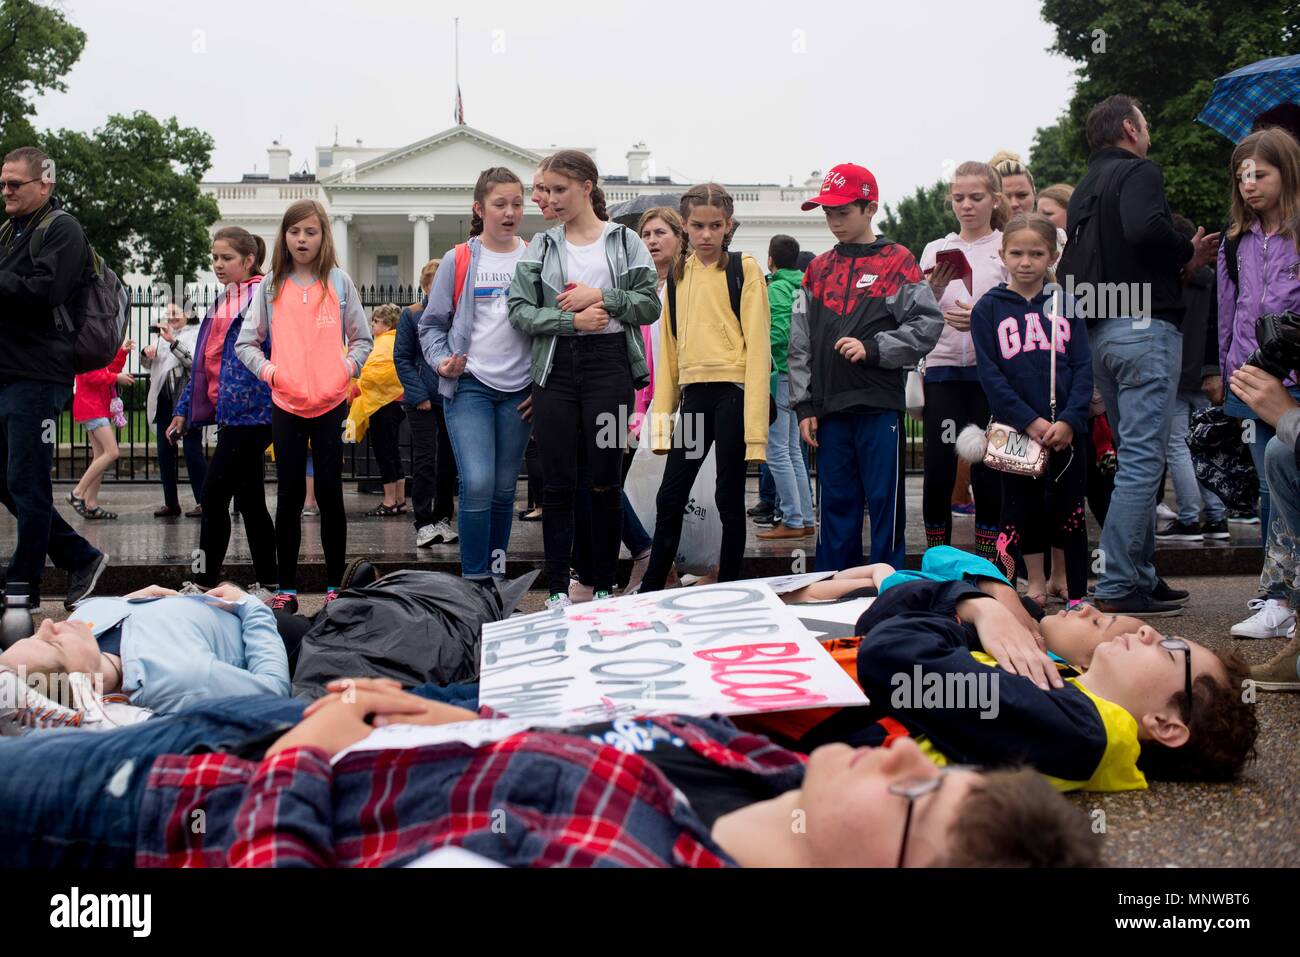 Washington, District of Columbia, USA. 19th May, 2018. A group of young tourists observe a ''lie-in'' staged by local high school students in front of the White House. The students demonstrated to honor the victims of the Santa Fe High School shooting in Texas and to demand the U.S. president and Congress work to pass gun control legislation. Credit: Erin Scott/ZUMA Wire/Alamy Live News Stock Photo